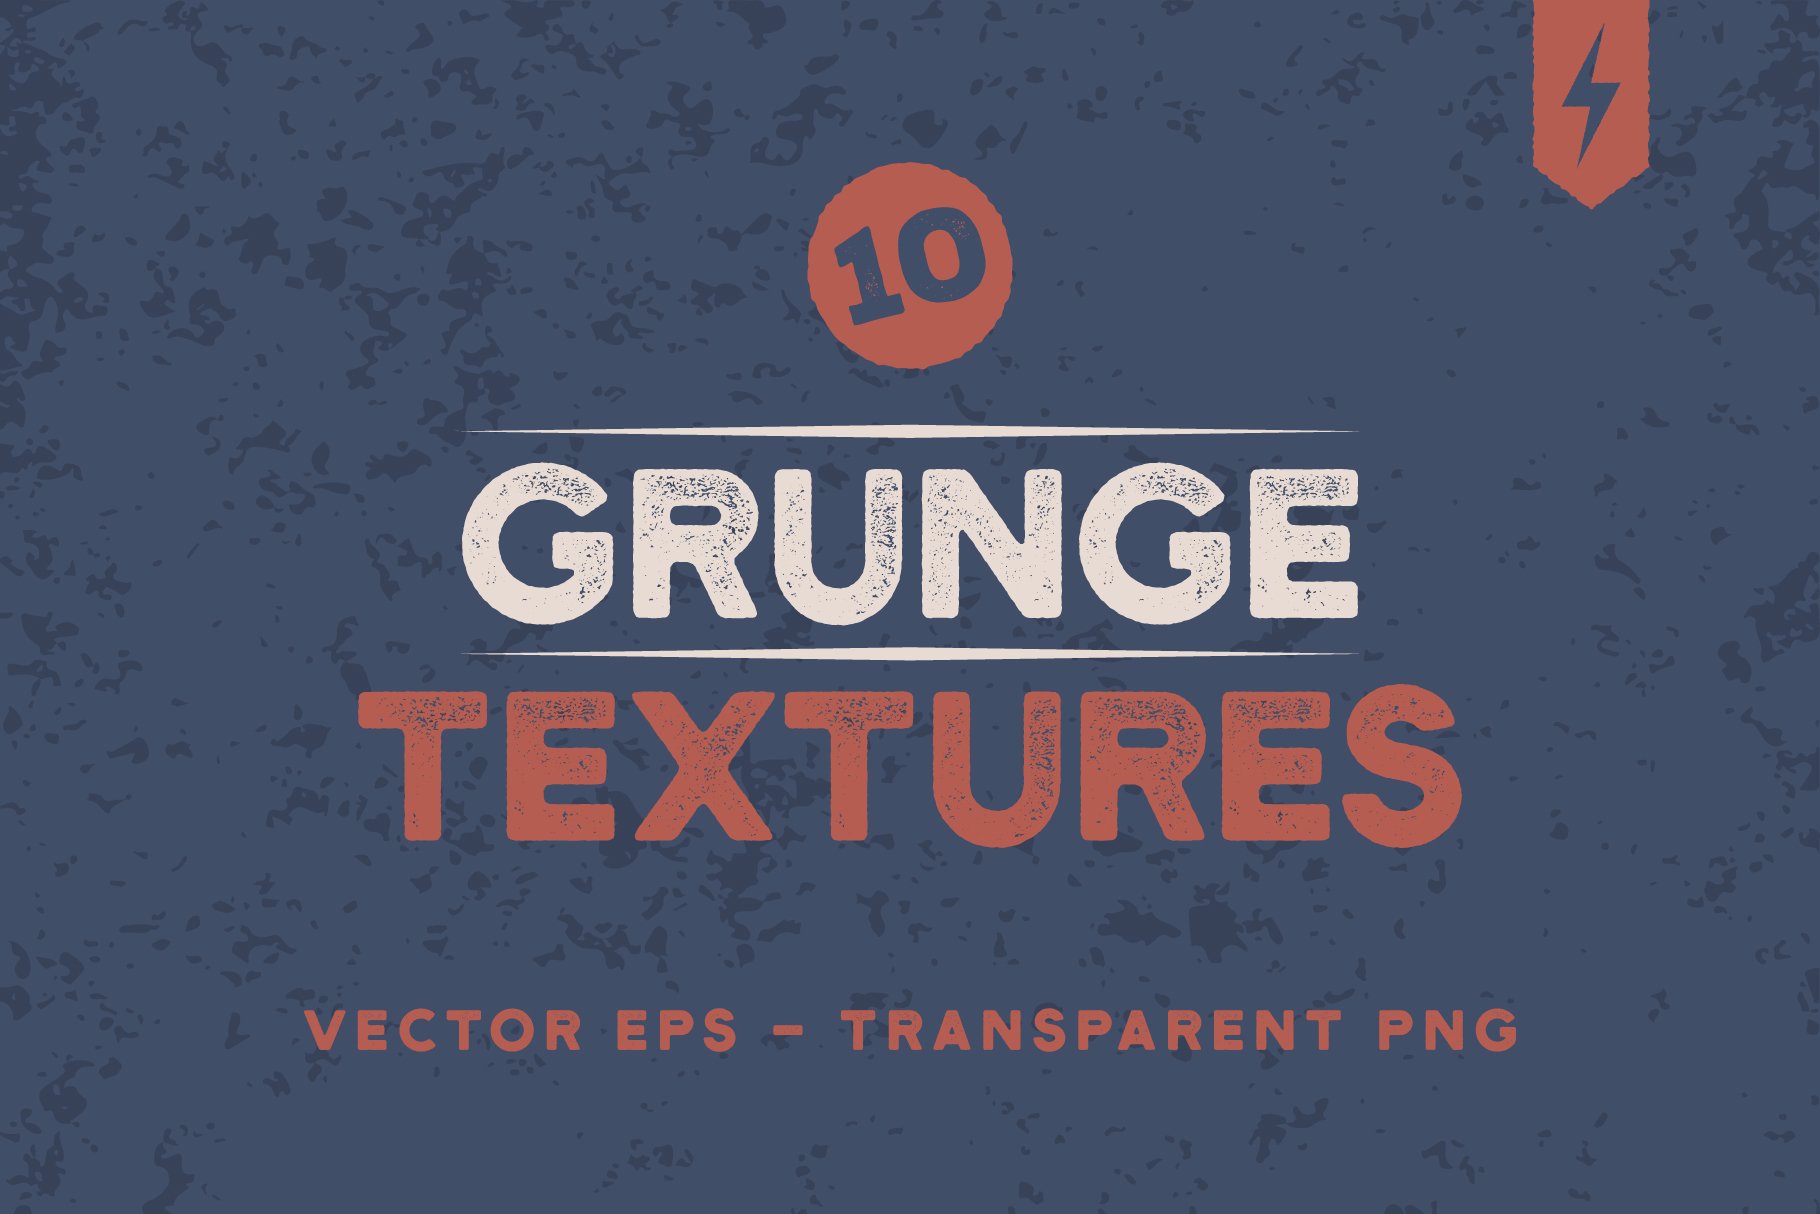 Vector Grunge Textures Vol. 2 cover image.